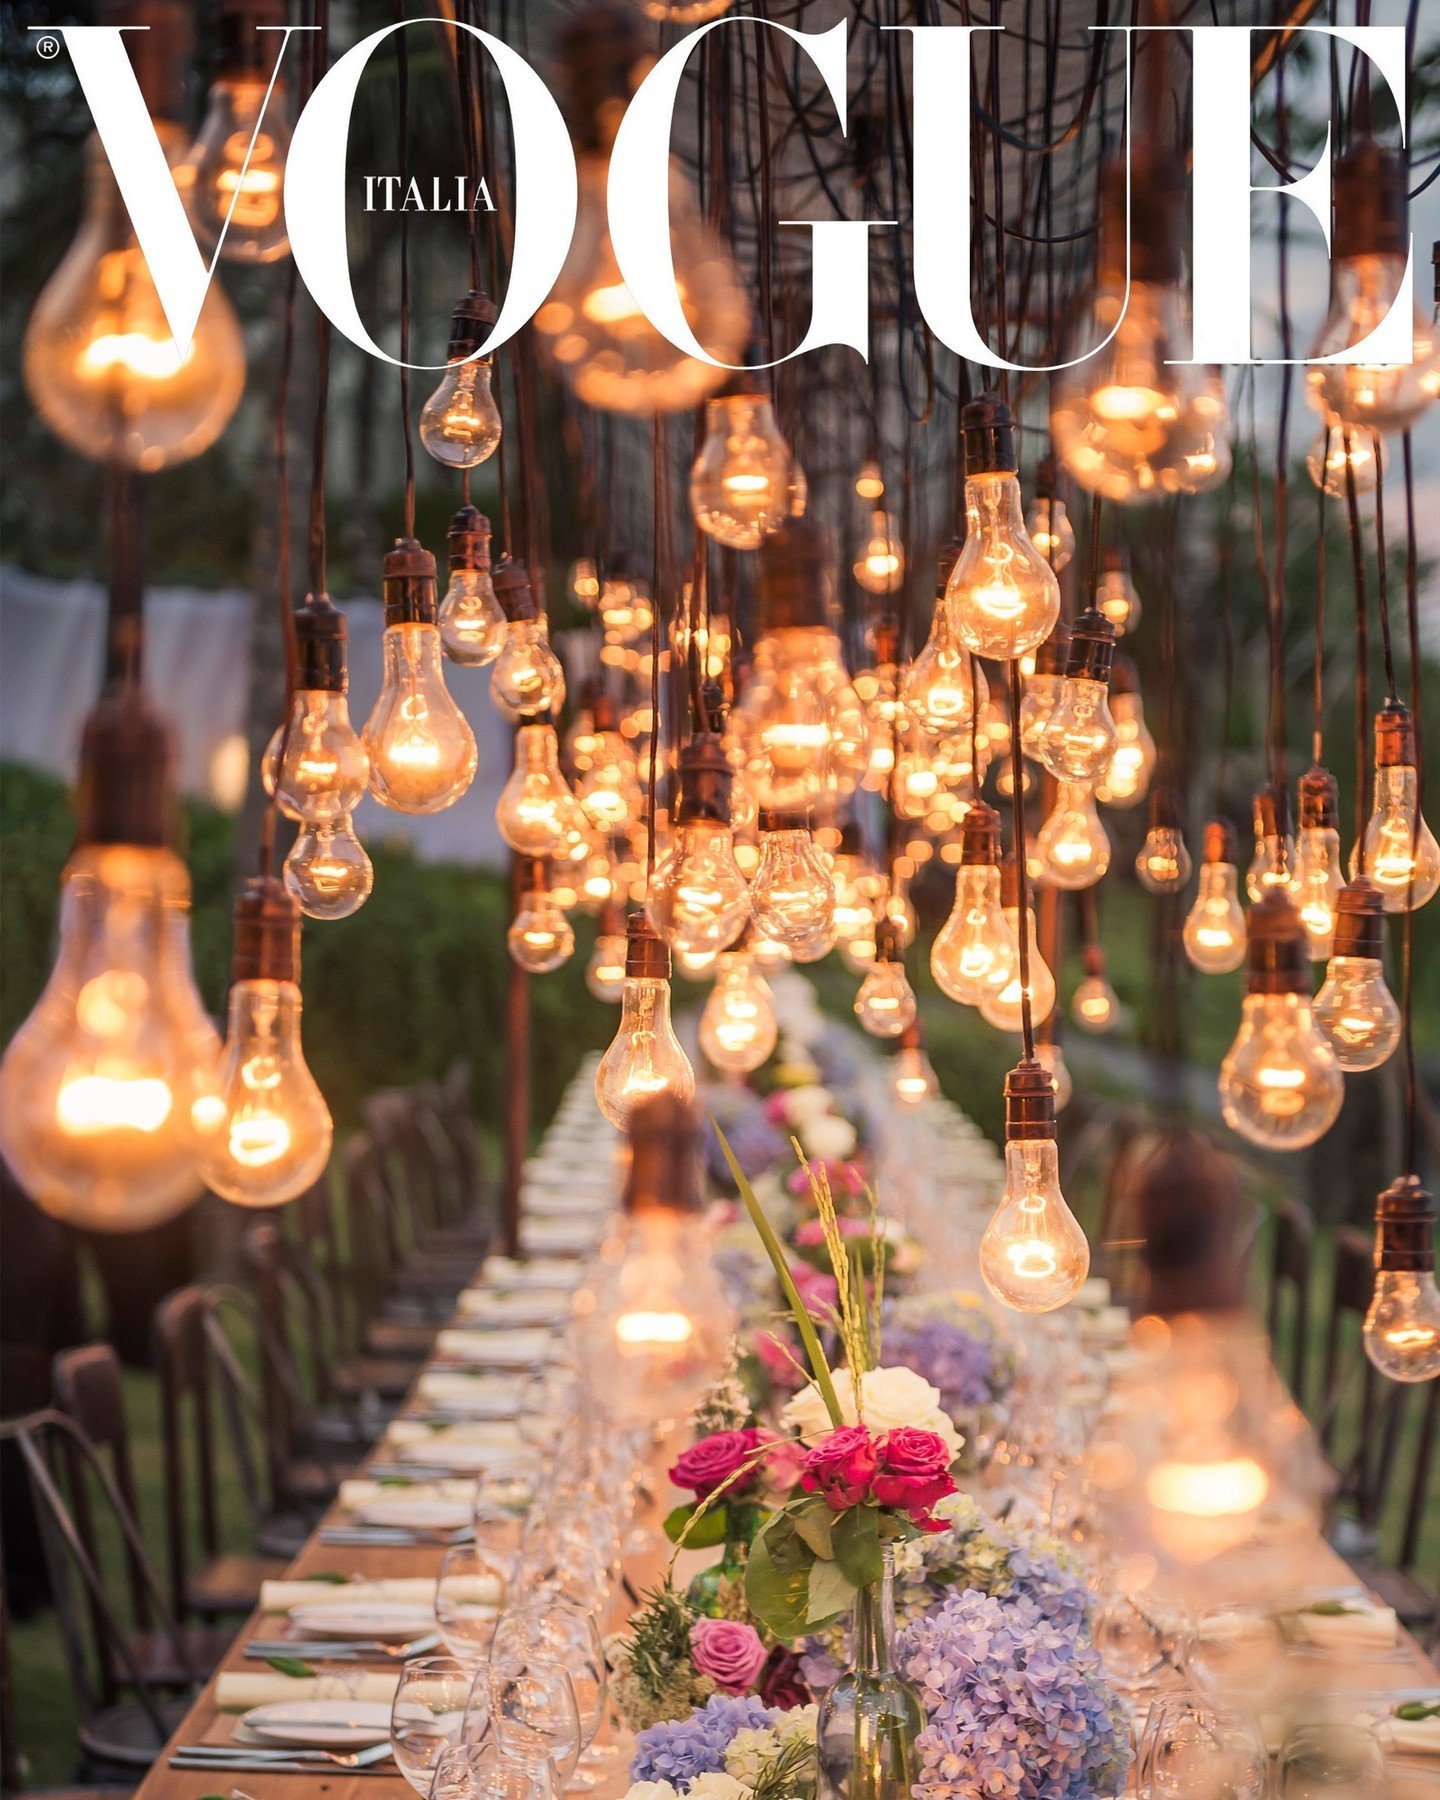 Angie and Ben Part 2 Featured in Vogue with their out of this world wedding at Khayangan Estate on the Uluwatu Peninsula in Bali. @khayanganestate⁠
⁠
Thank you to all the wonderful sites, IG accounts and wedding blogs that have featured our Lightbulb